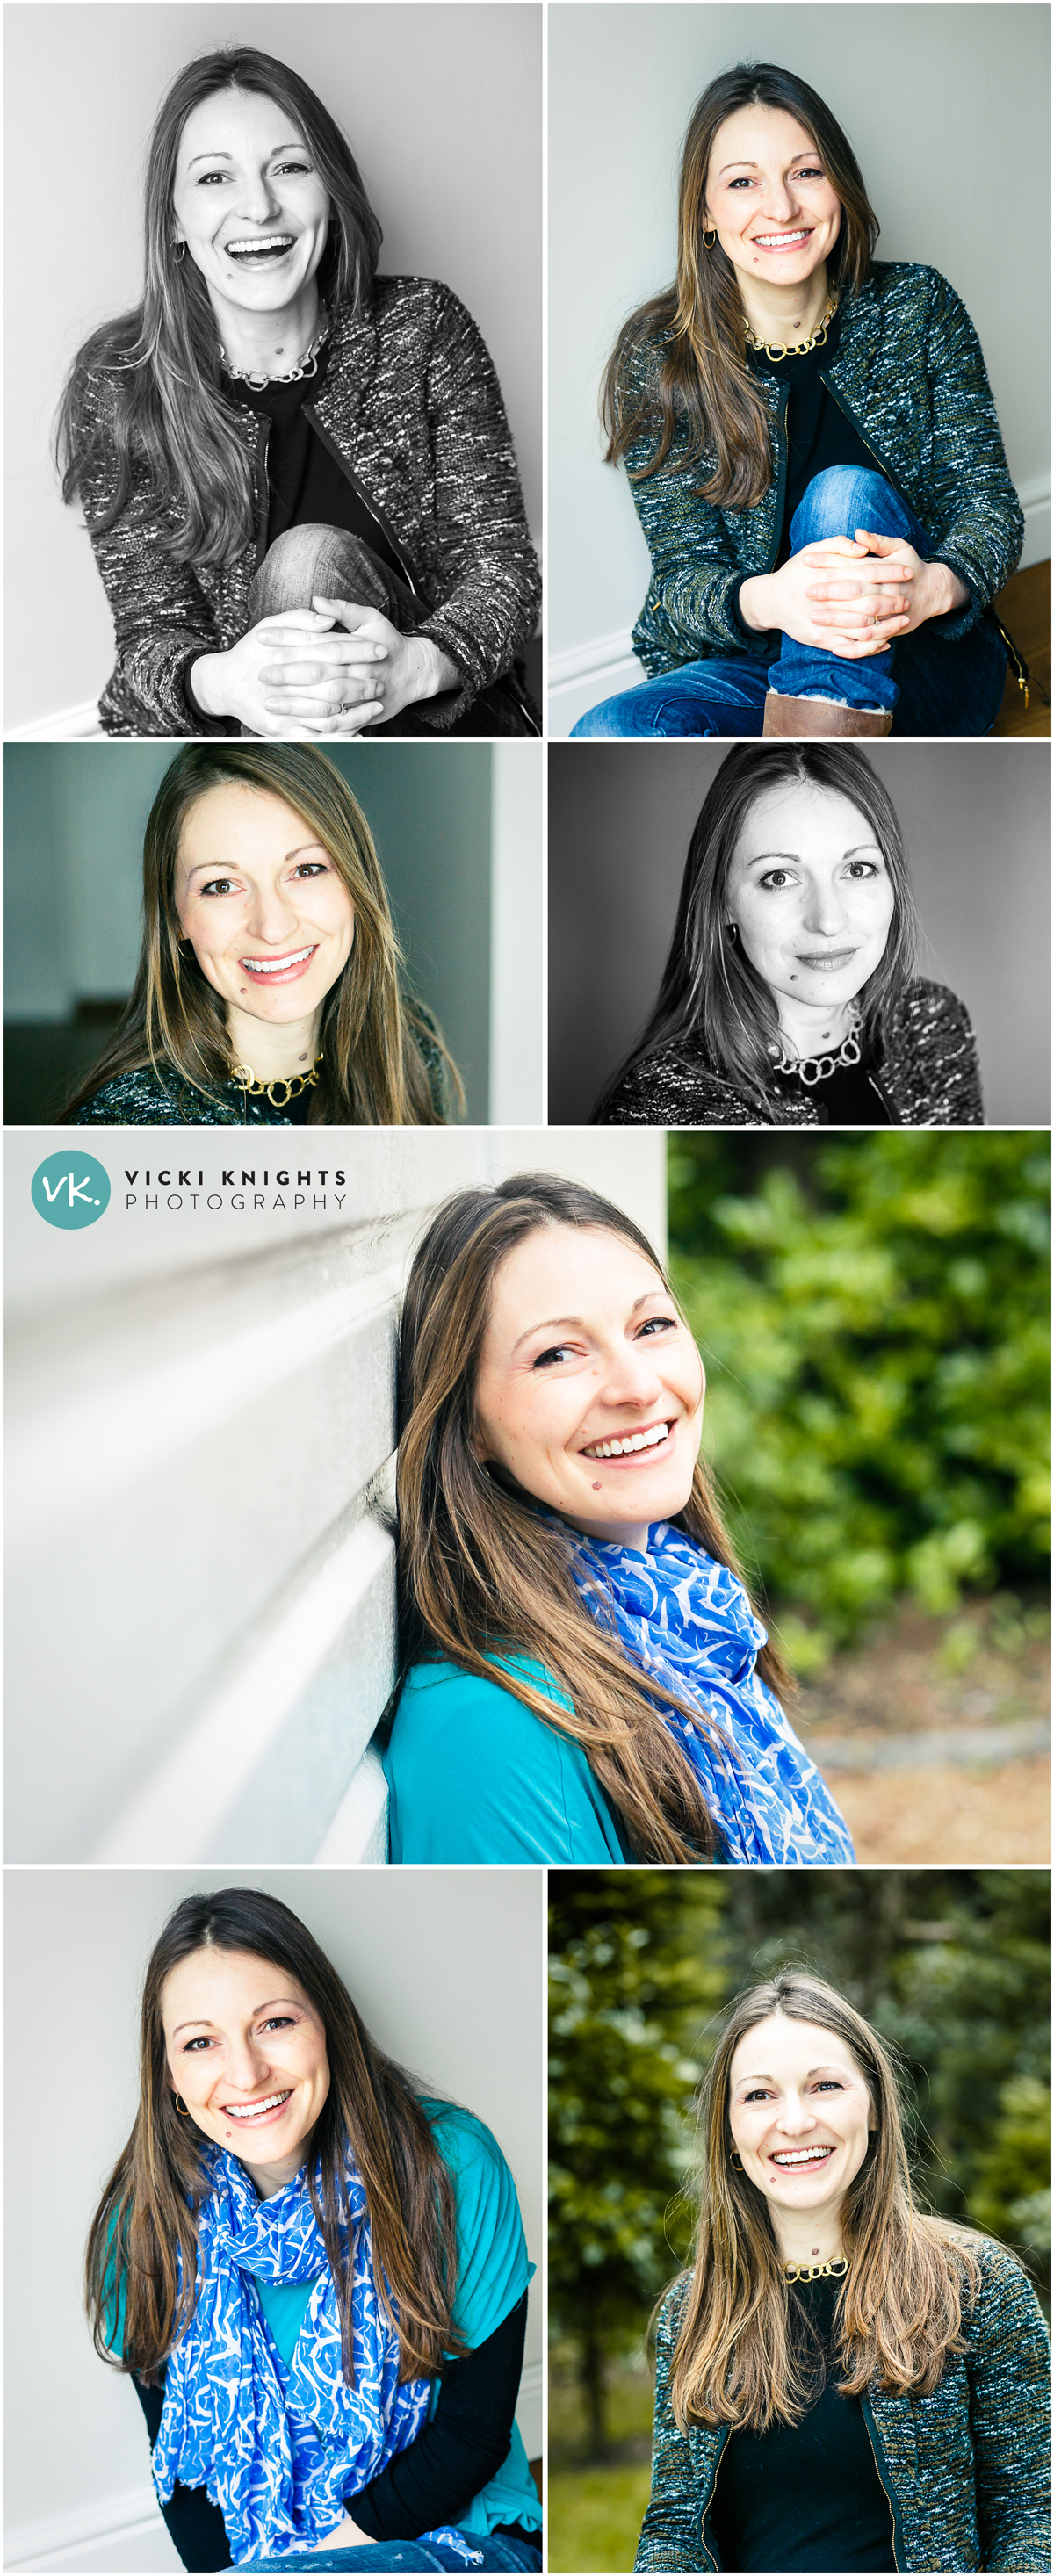 Headshot session in Haslemere, Surrey - Vicki Knights Photography